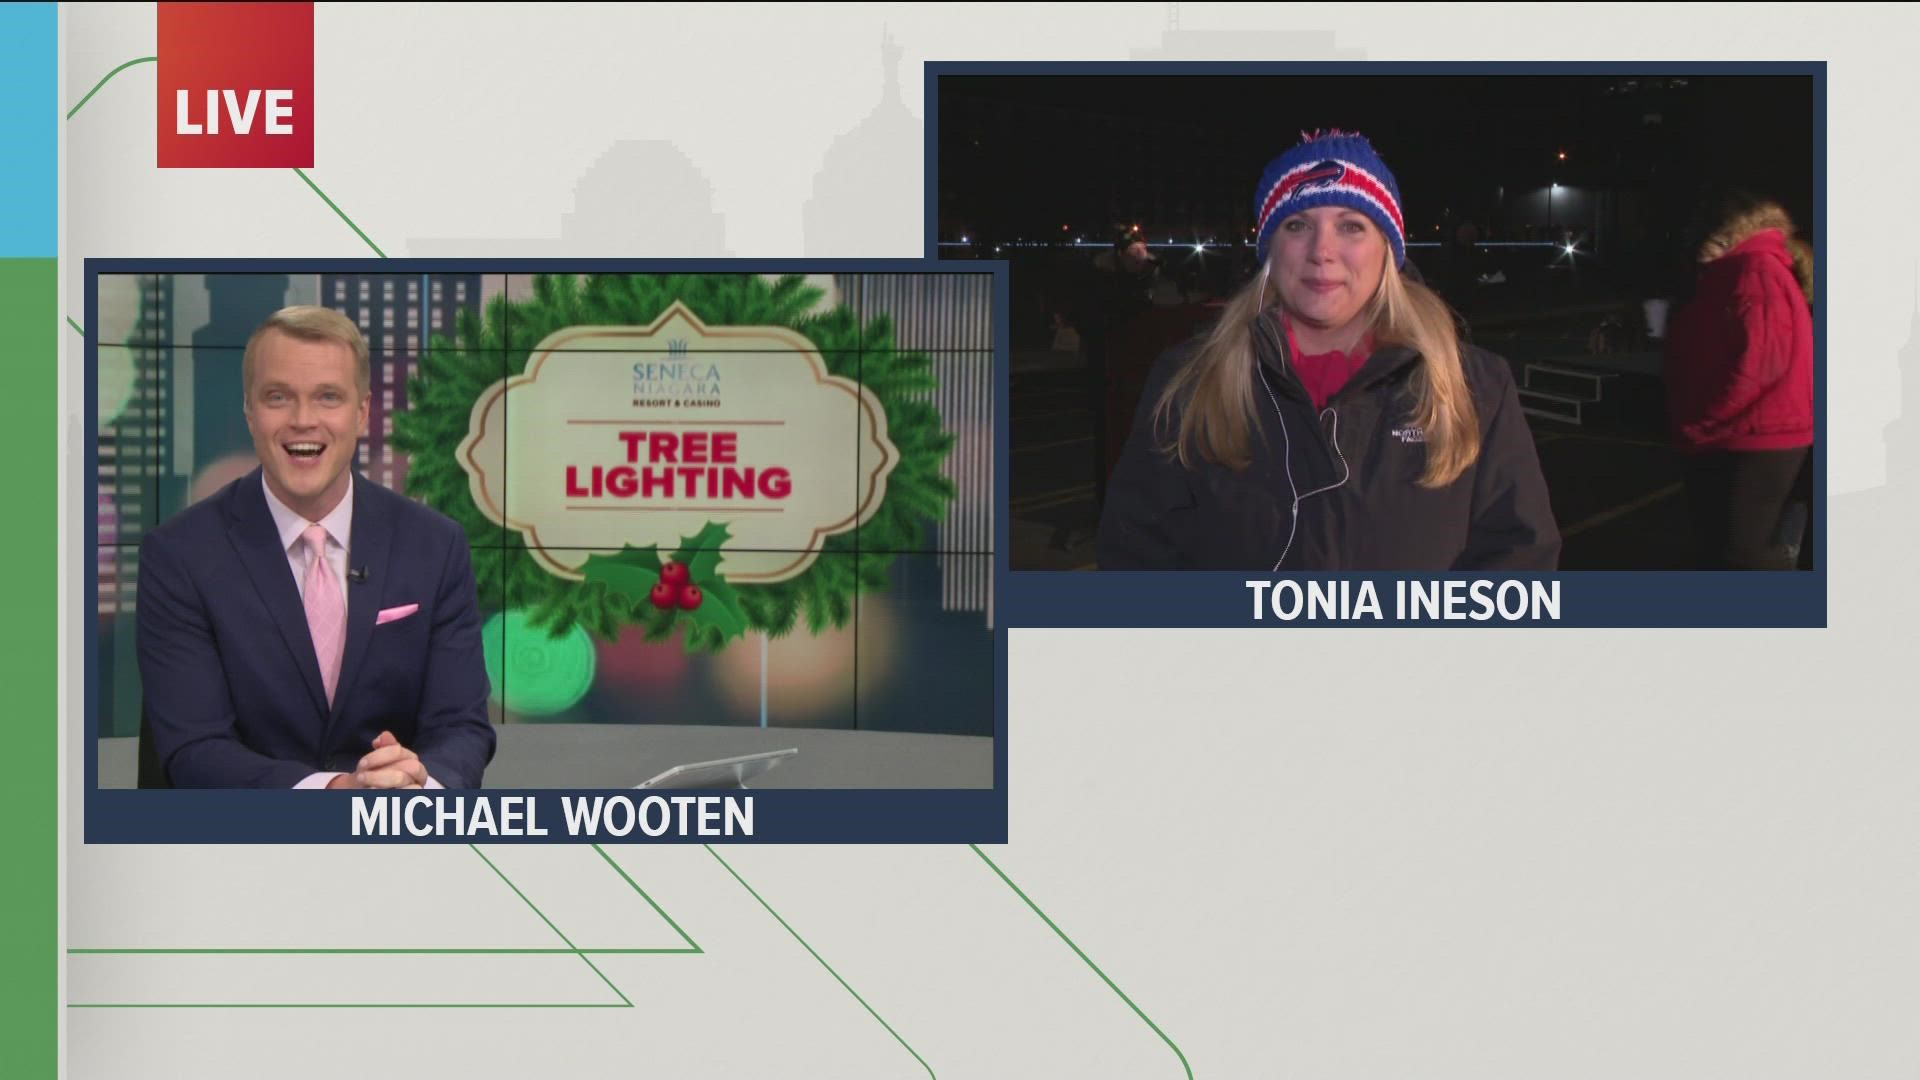 Tonia Ineson with Seneca Gaming Corp. talks about what people can expect tonight  at the tree lighting ceremony